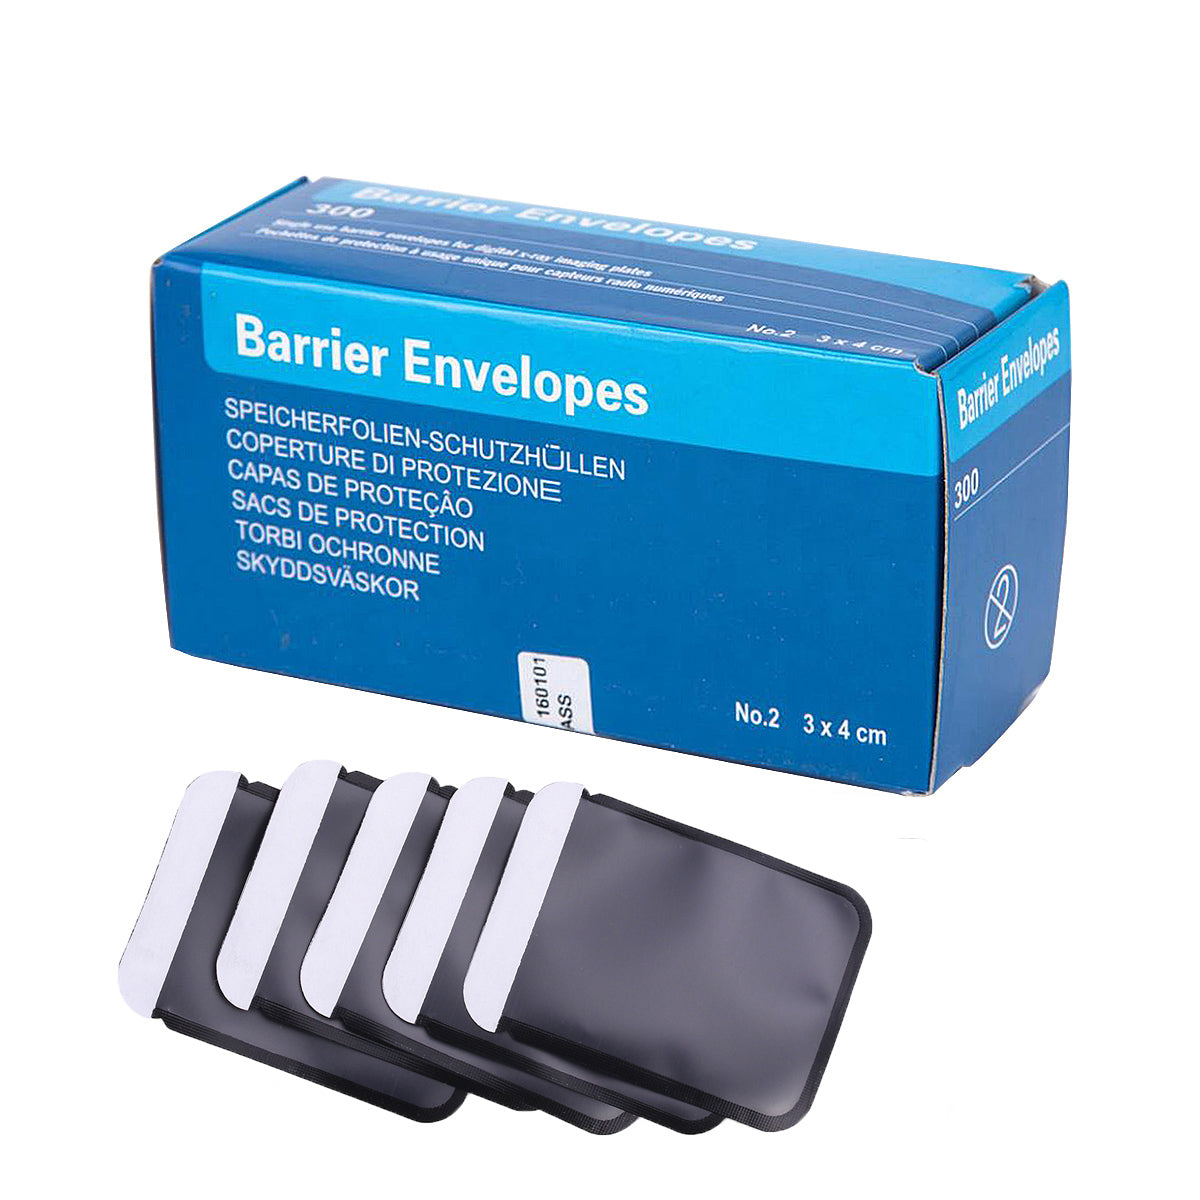 Dental Barrier Envelopes Size #2 for X-Ray ScanX 300pcs/Box - pairaydental.com